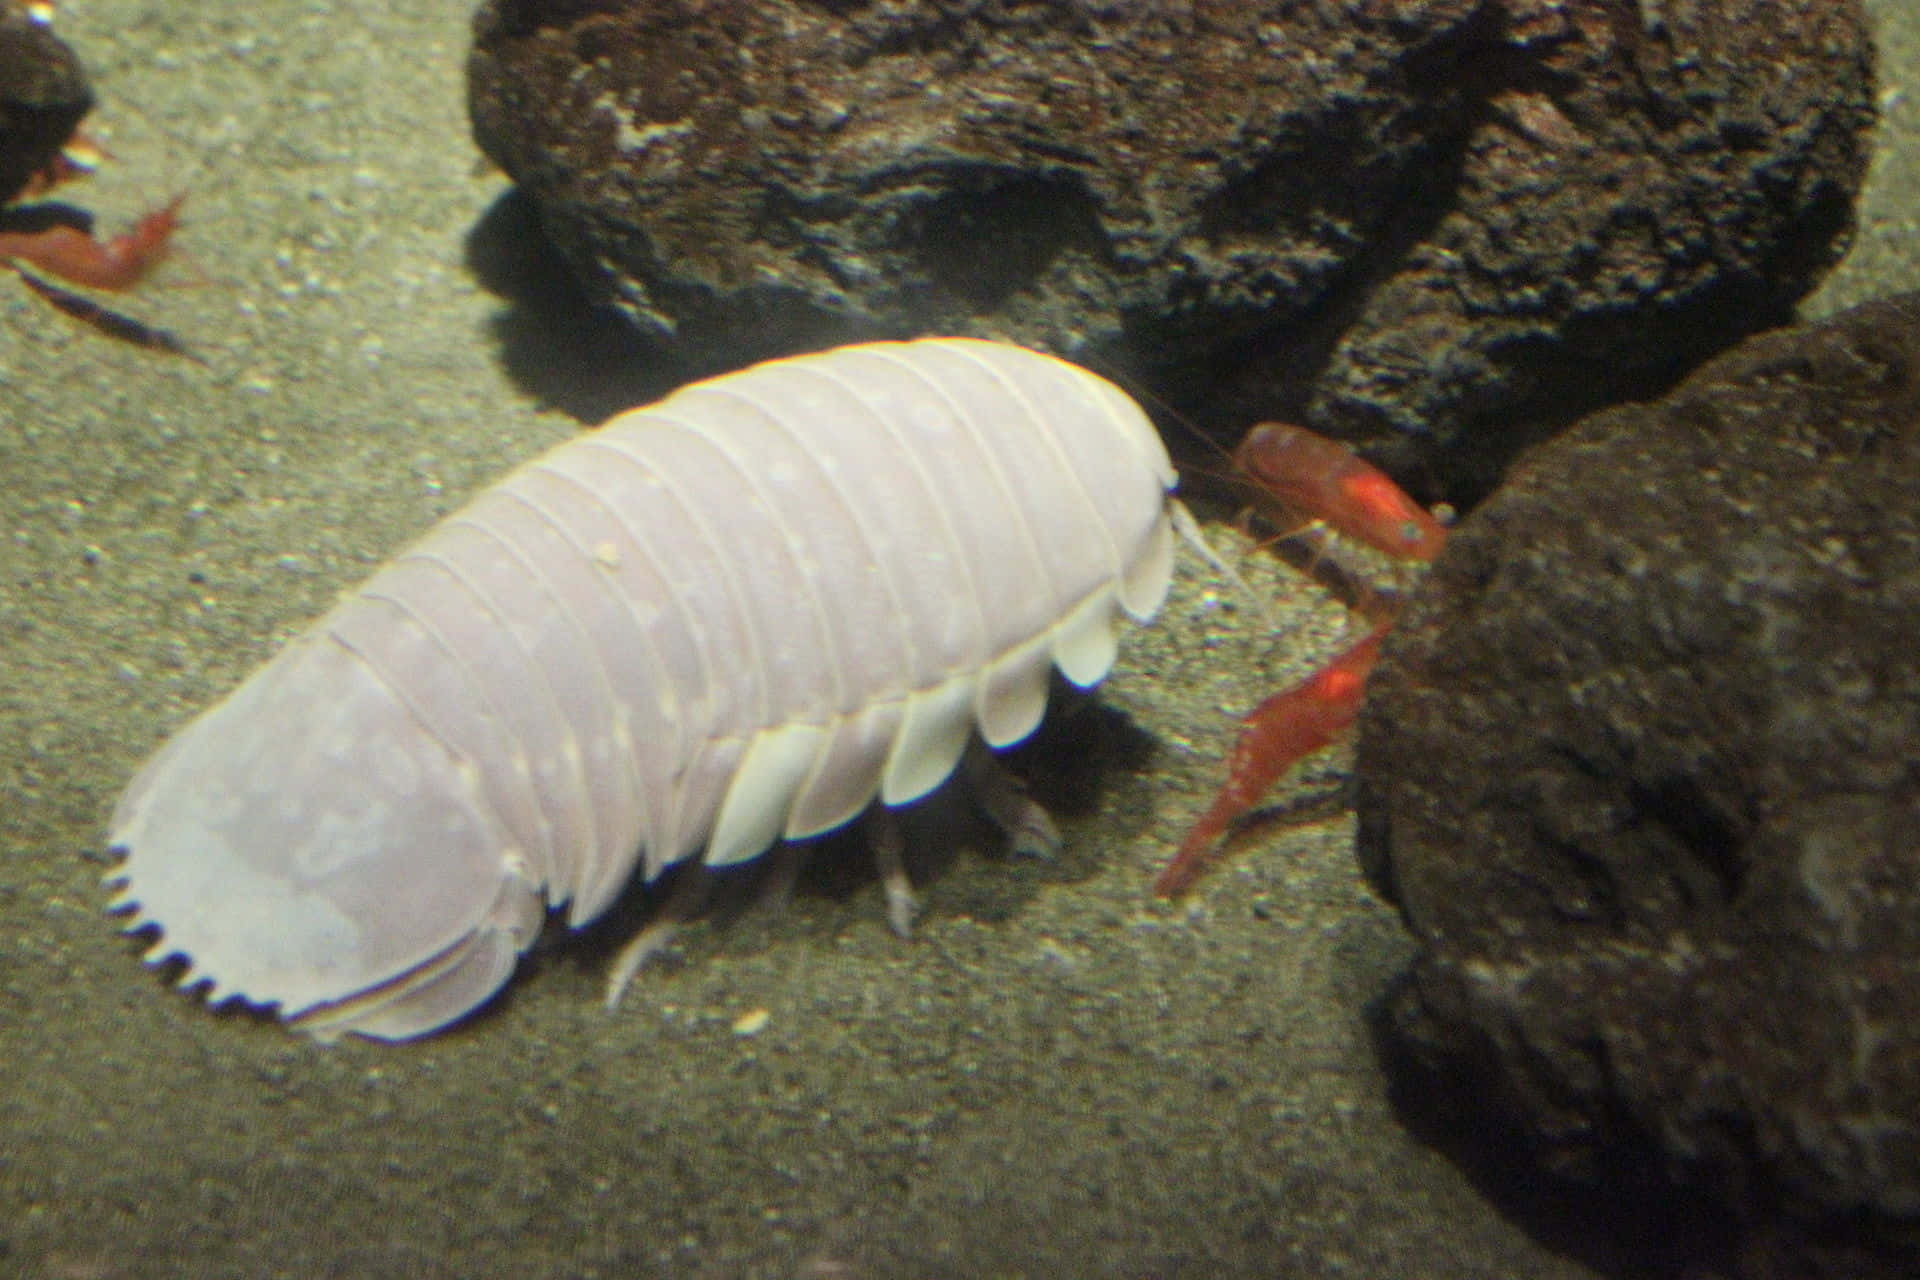 Caption: Majestic Isopod In Its Natural Underwater Environment Wallpaper